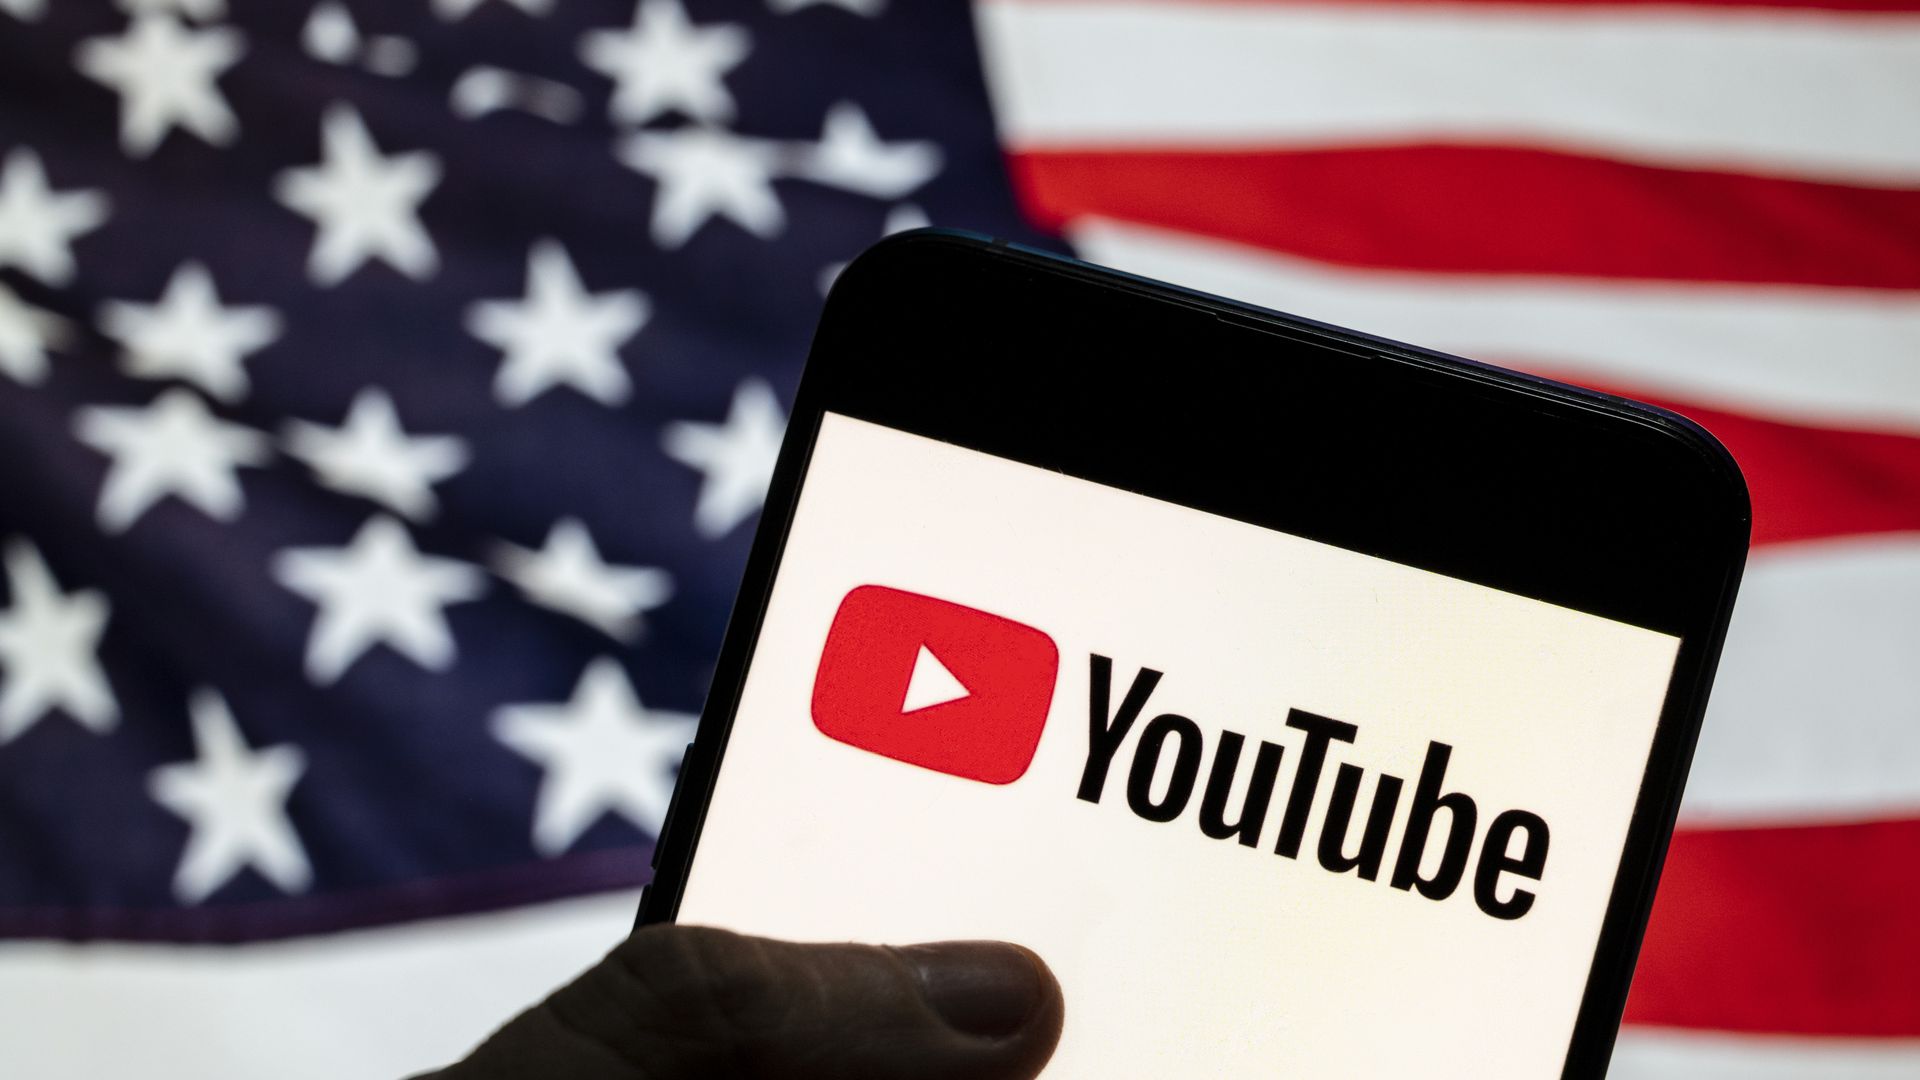 A photo illustration of a YouTube logo on a smartphone against an American flag background